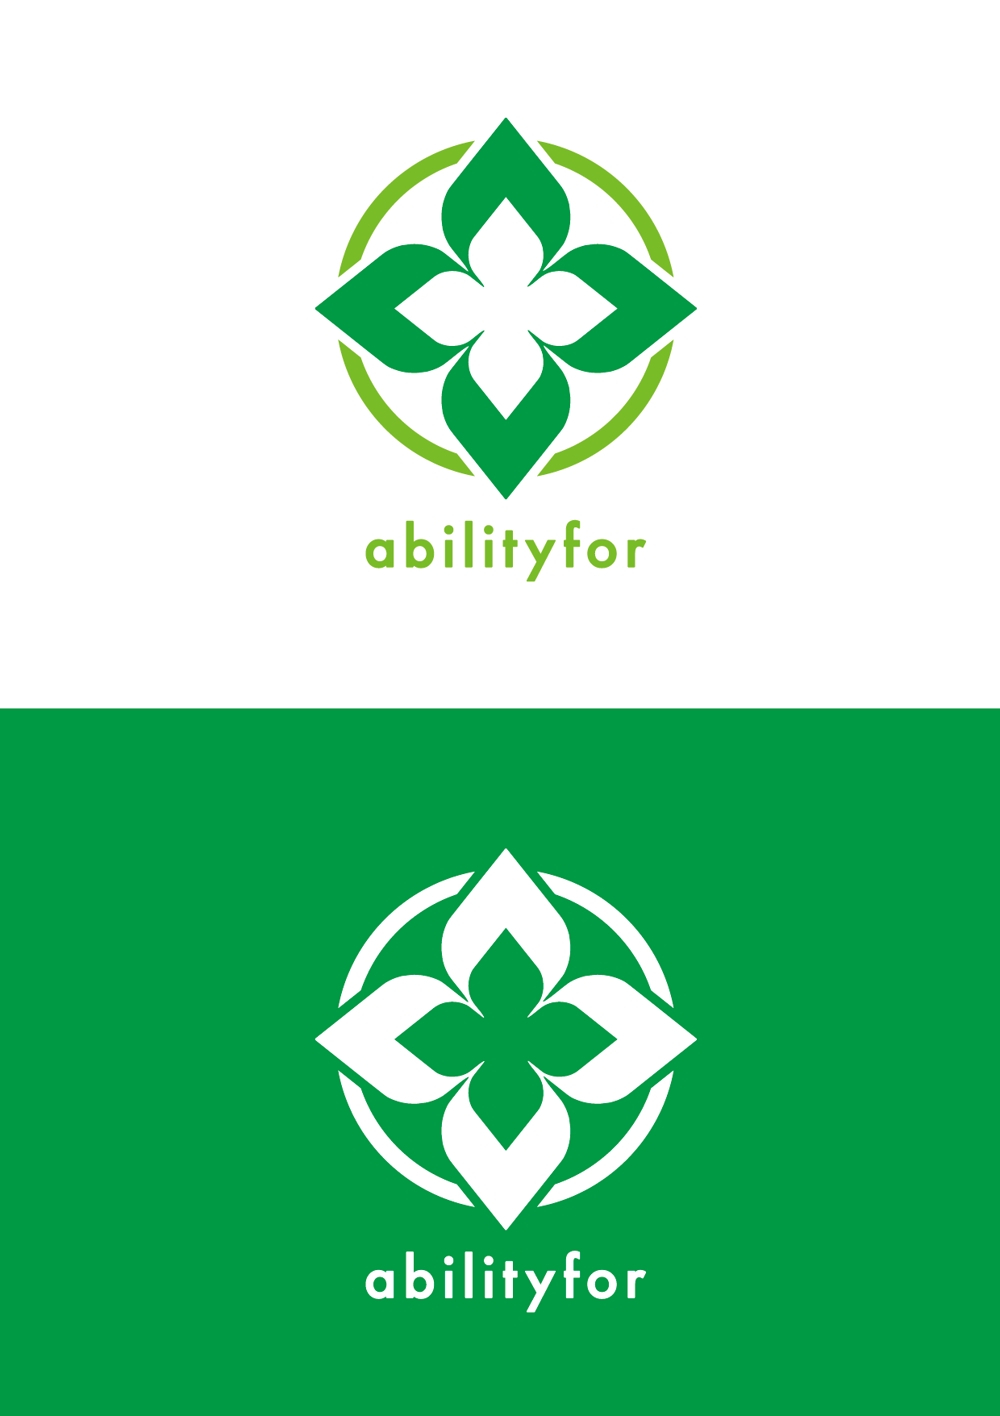 abilityfor2.png